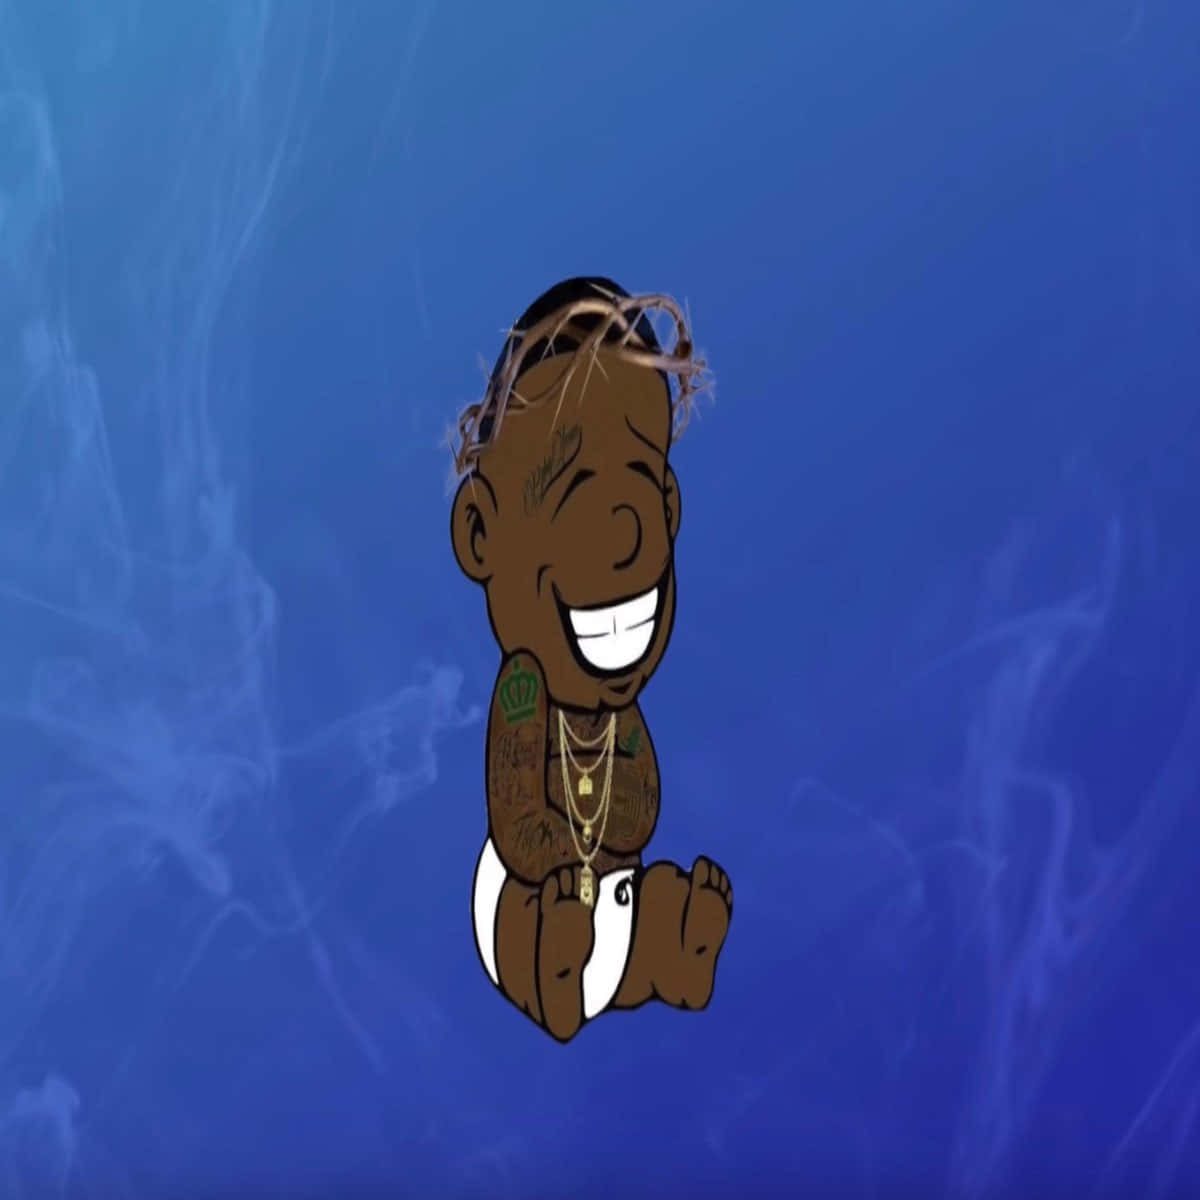 A Cartoon Character Is Sitting On A Blue Background Wallpaper